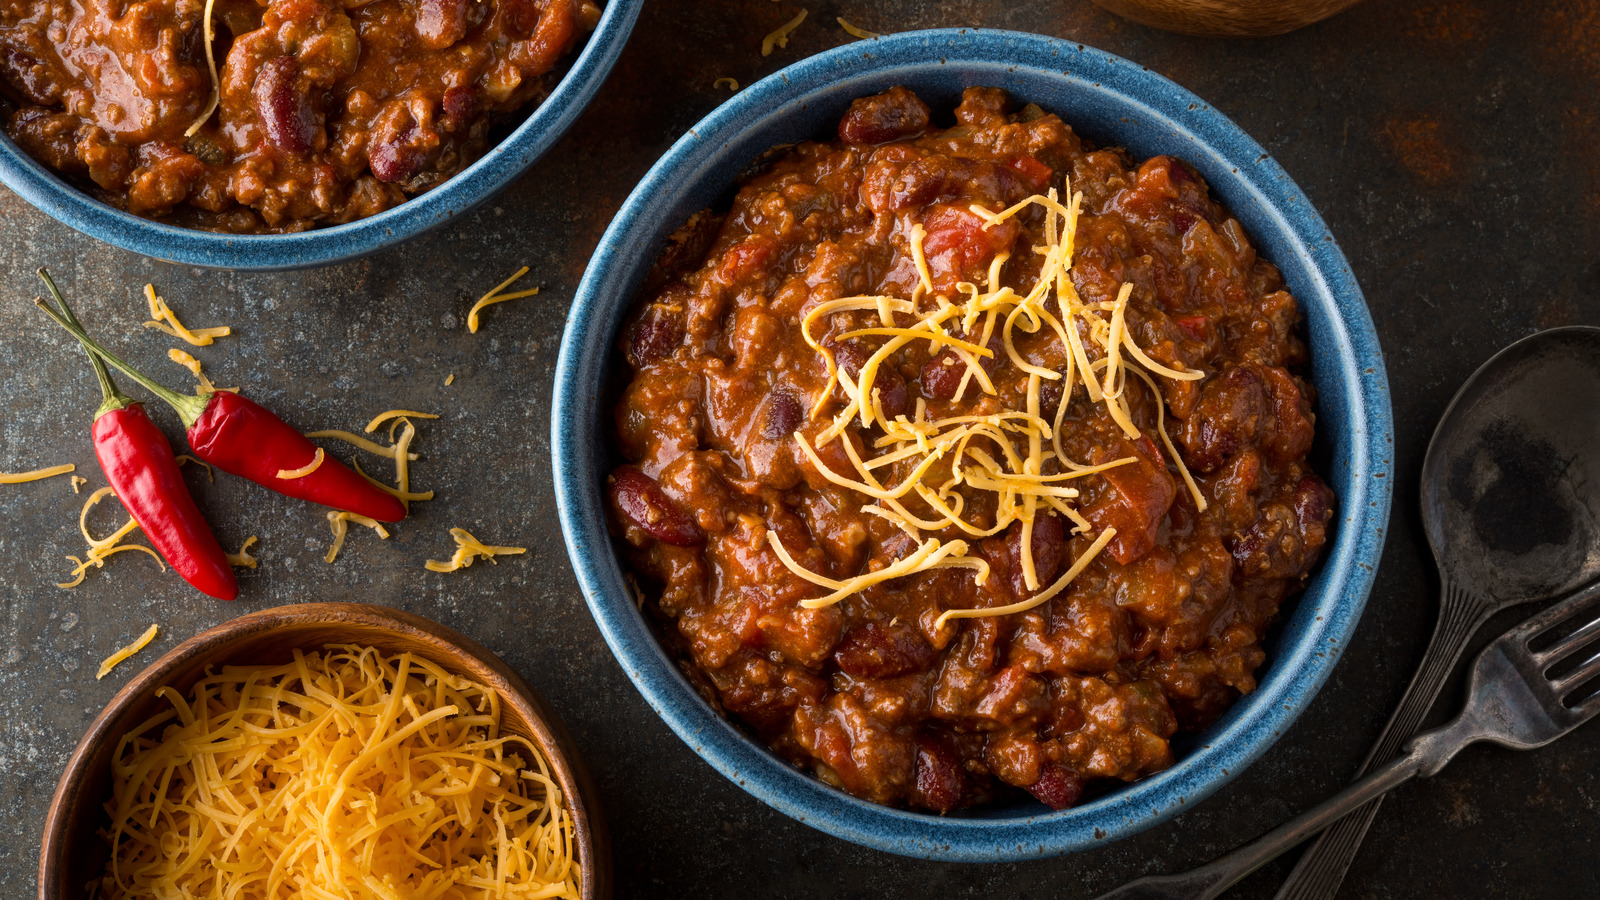 On a crisp fall day, a warm bowl of chili is great to cozy up with. 